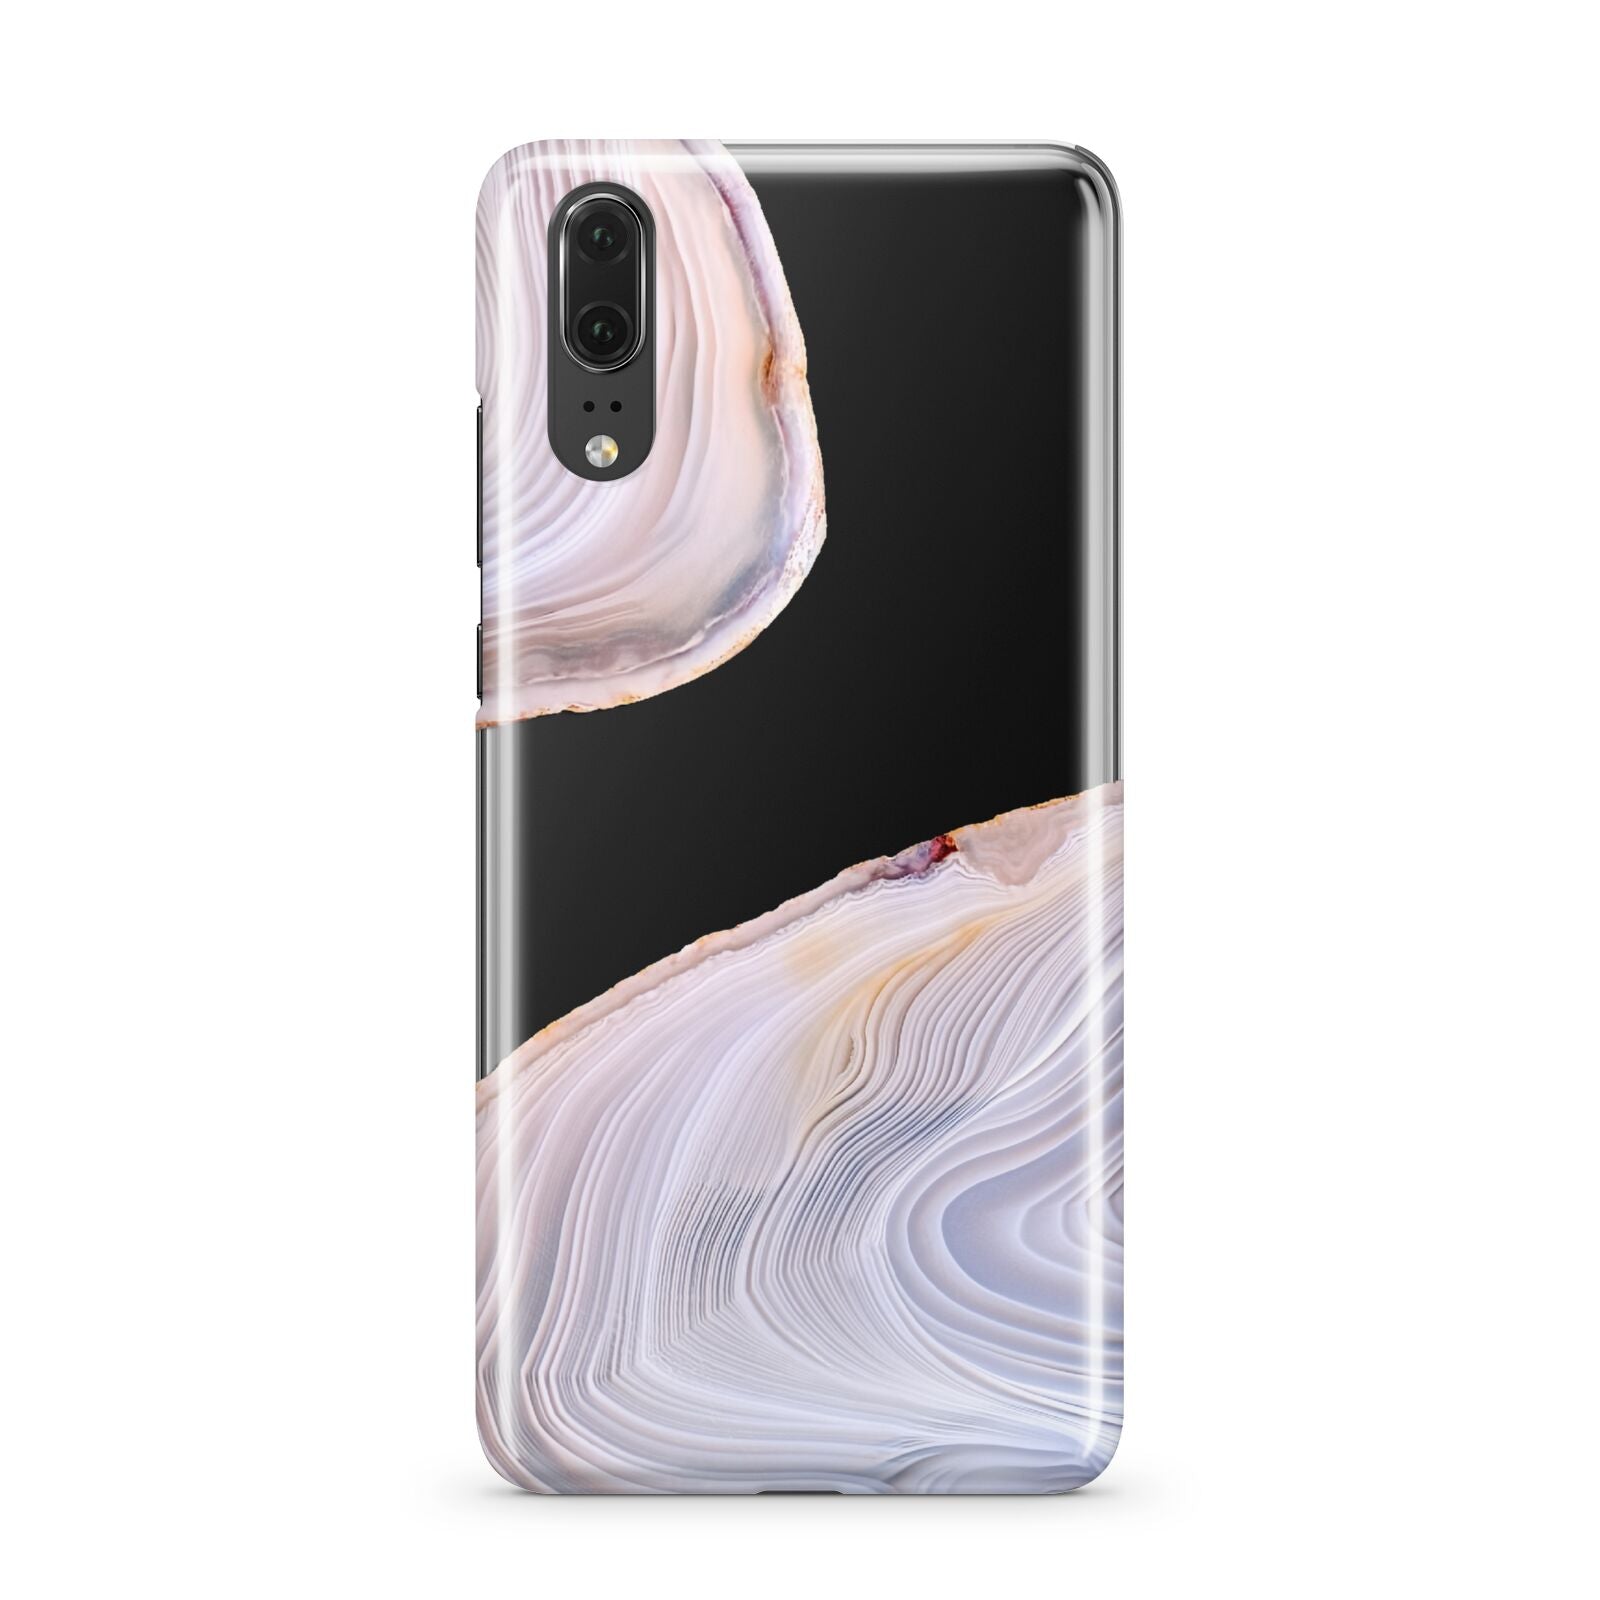 Agate Pale Pink and Blue Huawei P20 Phone Case